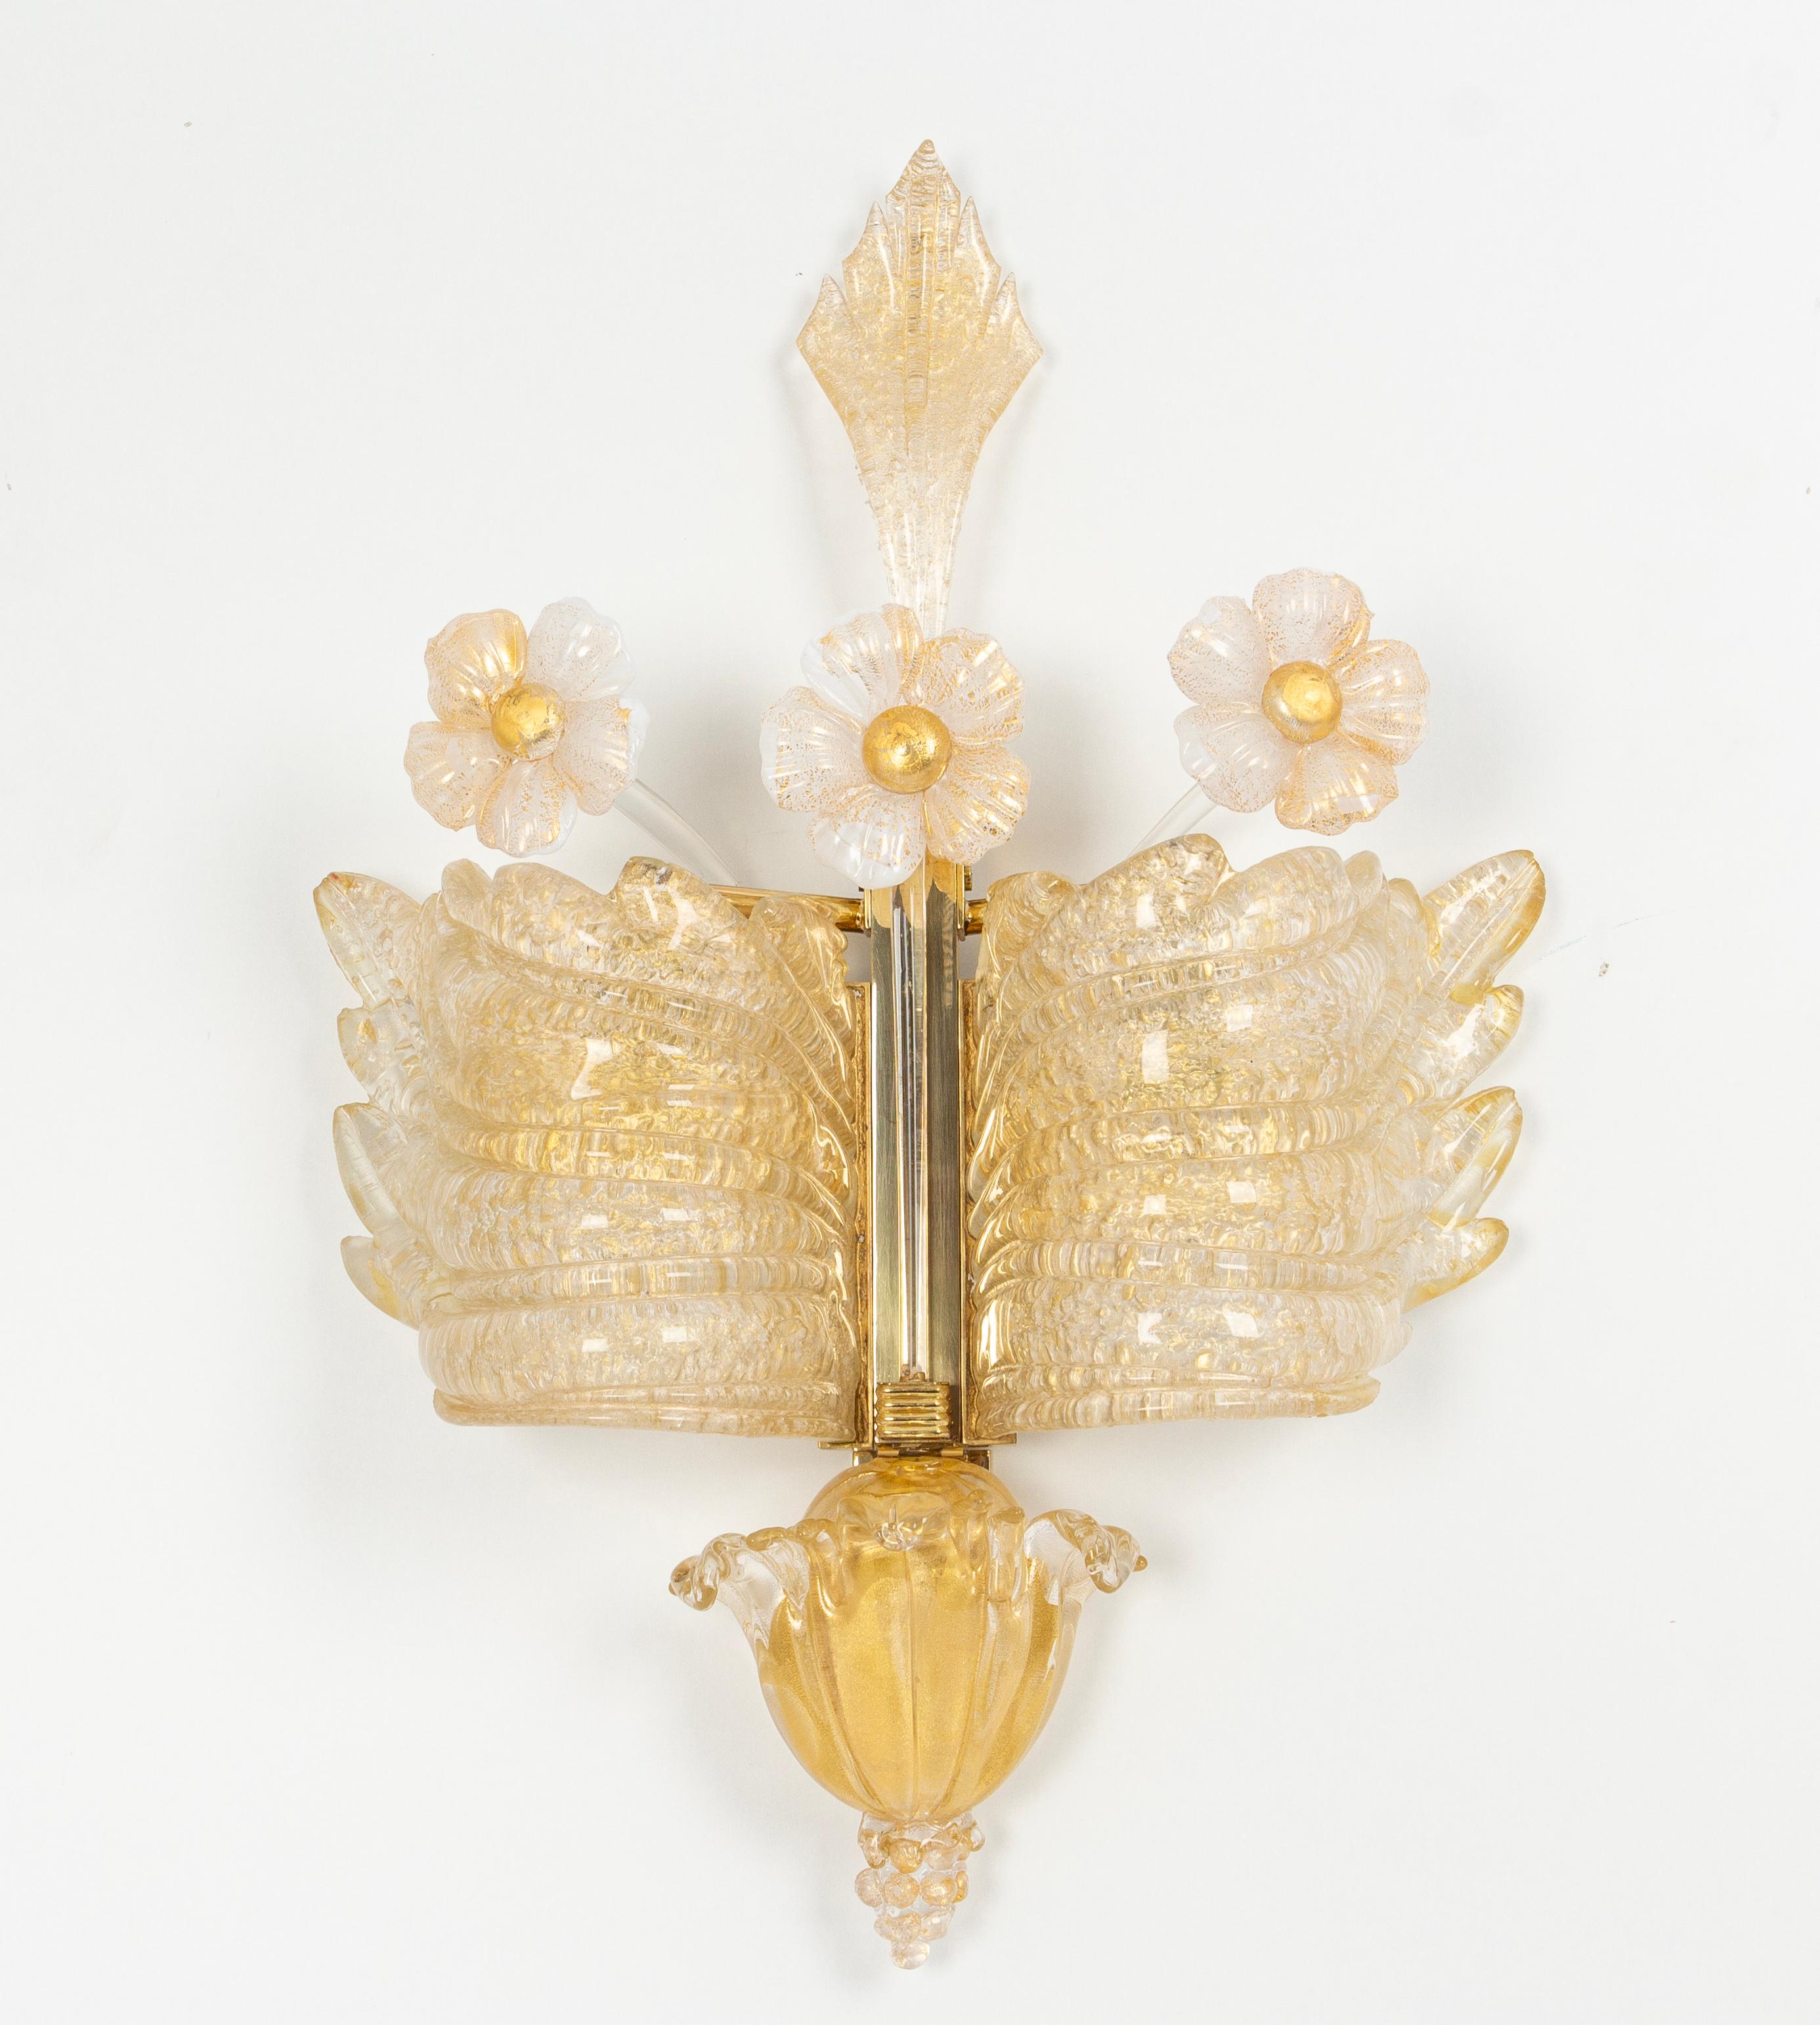 Pair of Large Murano Glass Wall Sconces by Barovier & Toso, Italy, 1970s For Sale 4